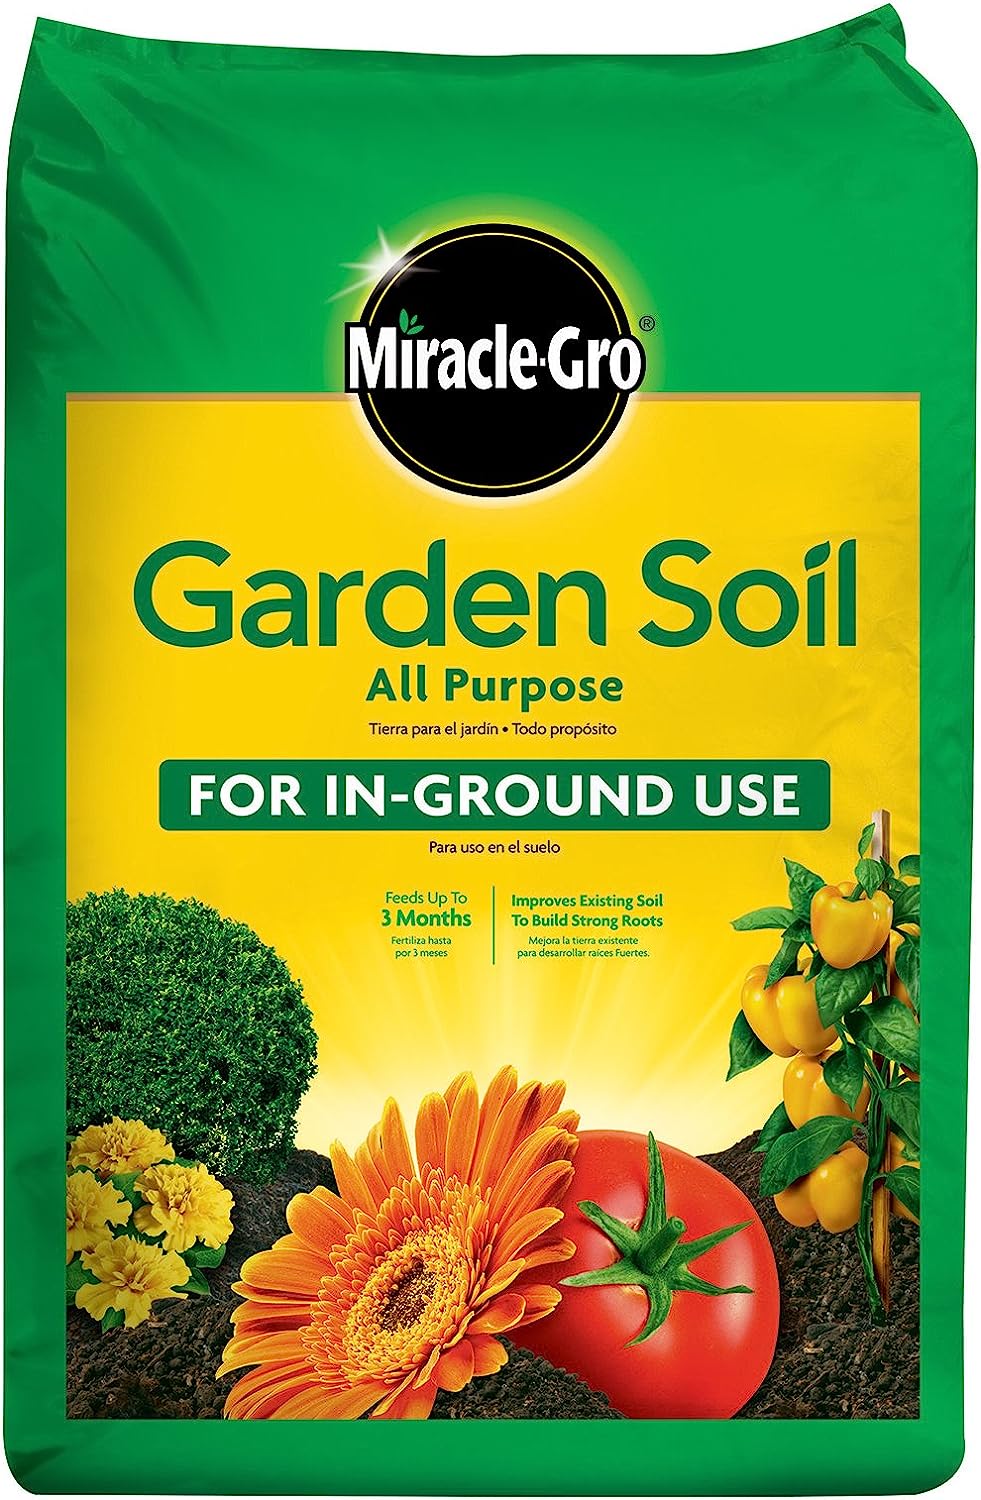 Miracle-Gro Garden Soil All Purpose: 1 cu. ft., For [...]